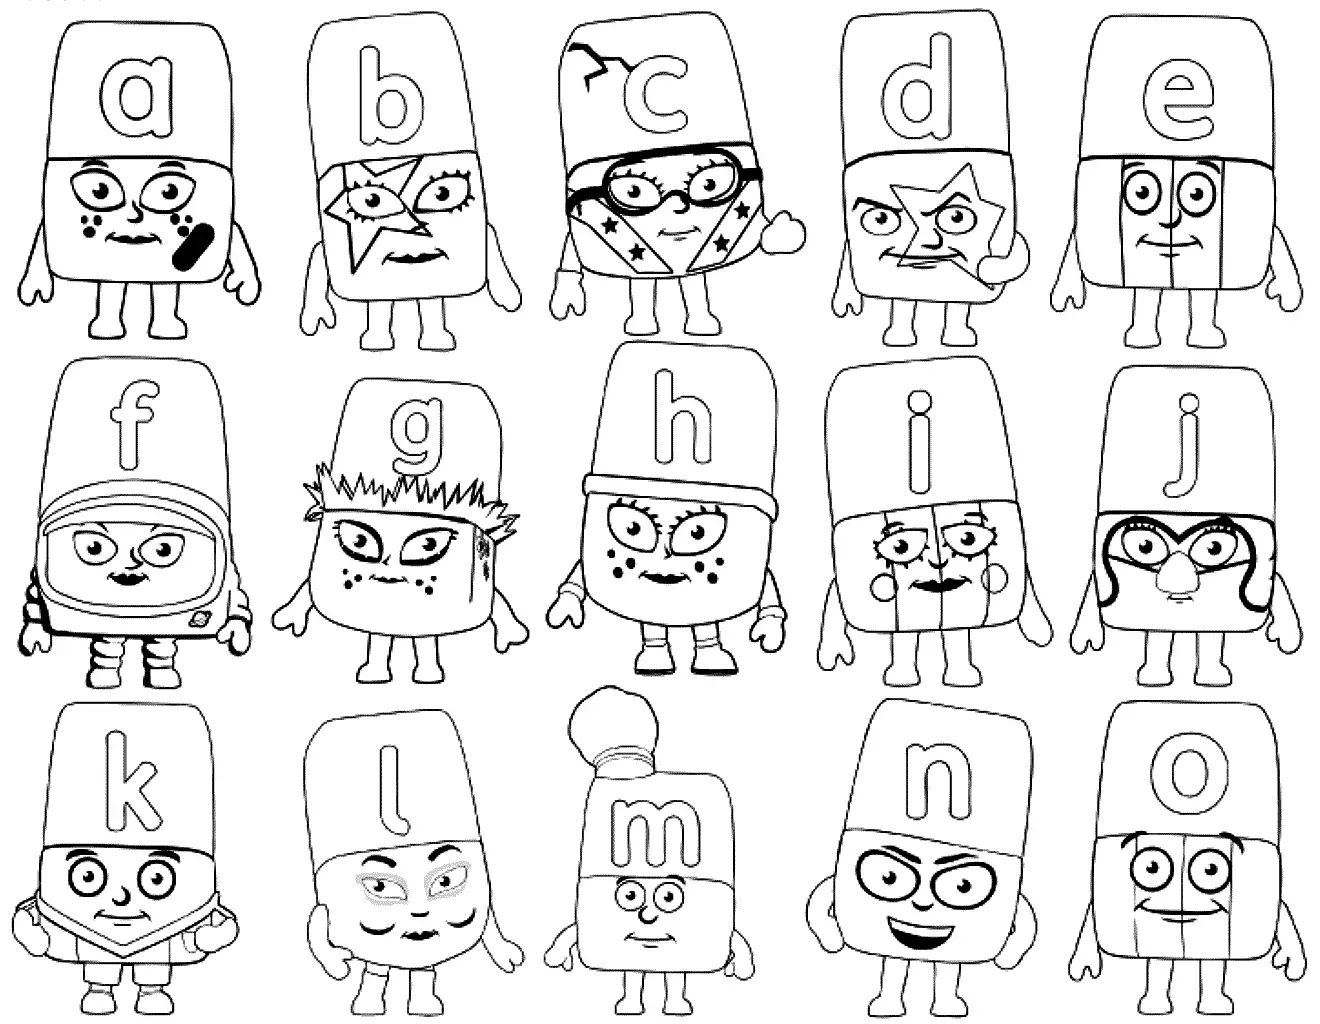 Let's Have Fun with Alphablocks Coloring Pages Pdf - Alphablocks from A to O Coloring Pages